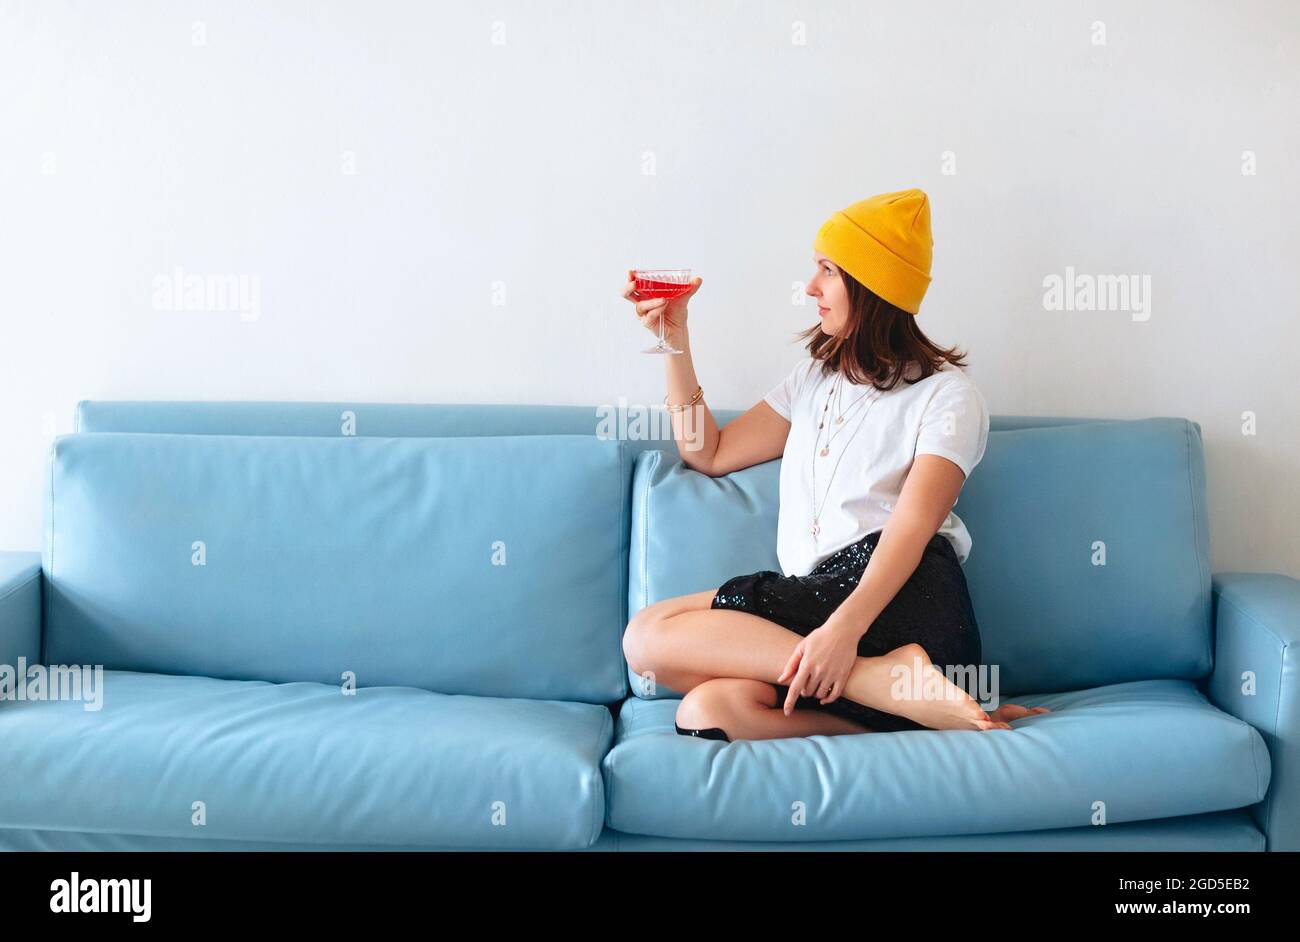 Cropped shot of young smiling woman holding cocktail glass in hand with red alcohol drink sitting on sofa at home, wearing fashionable clothes and acc Stock Photo